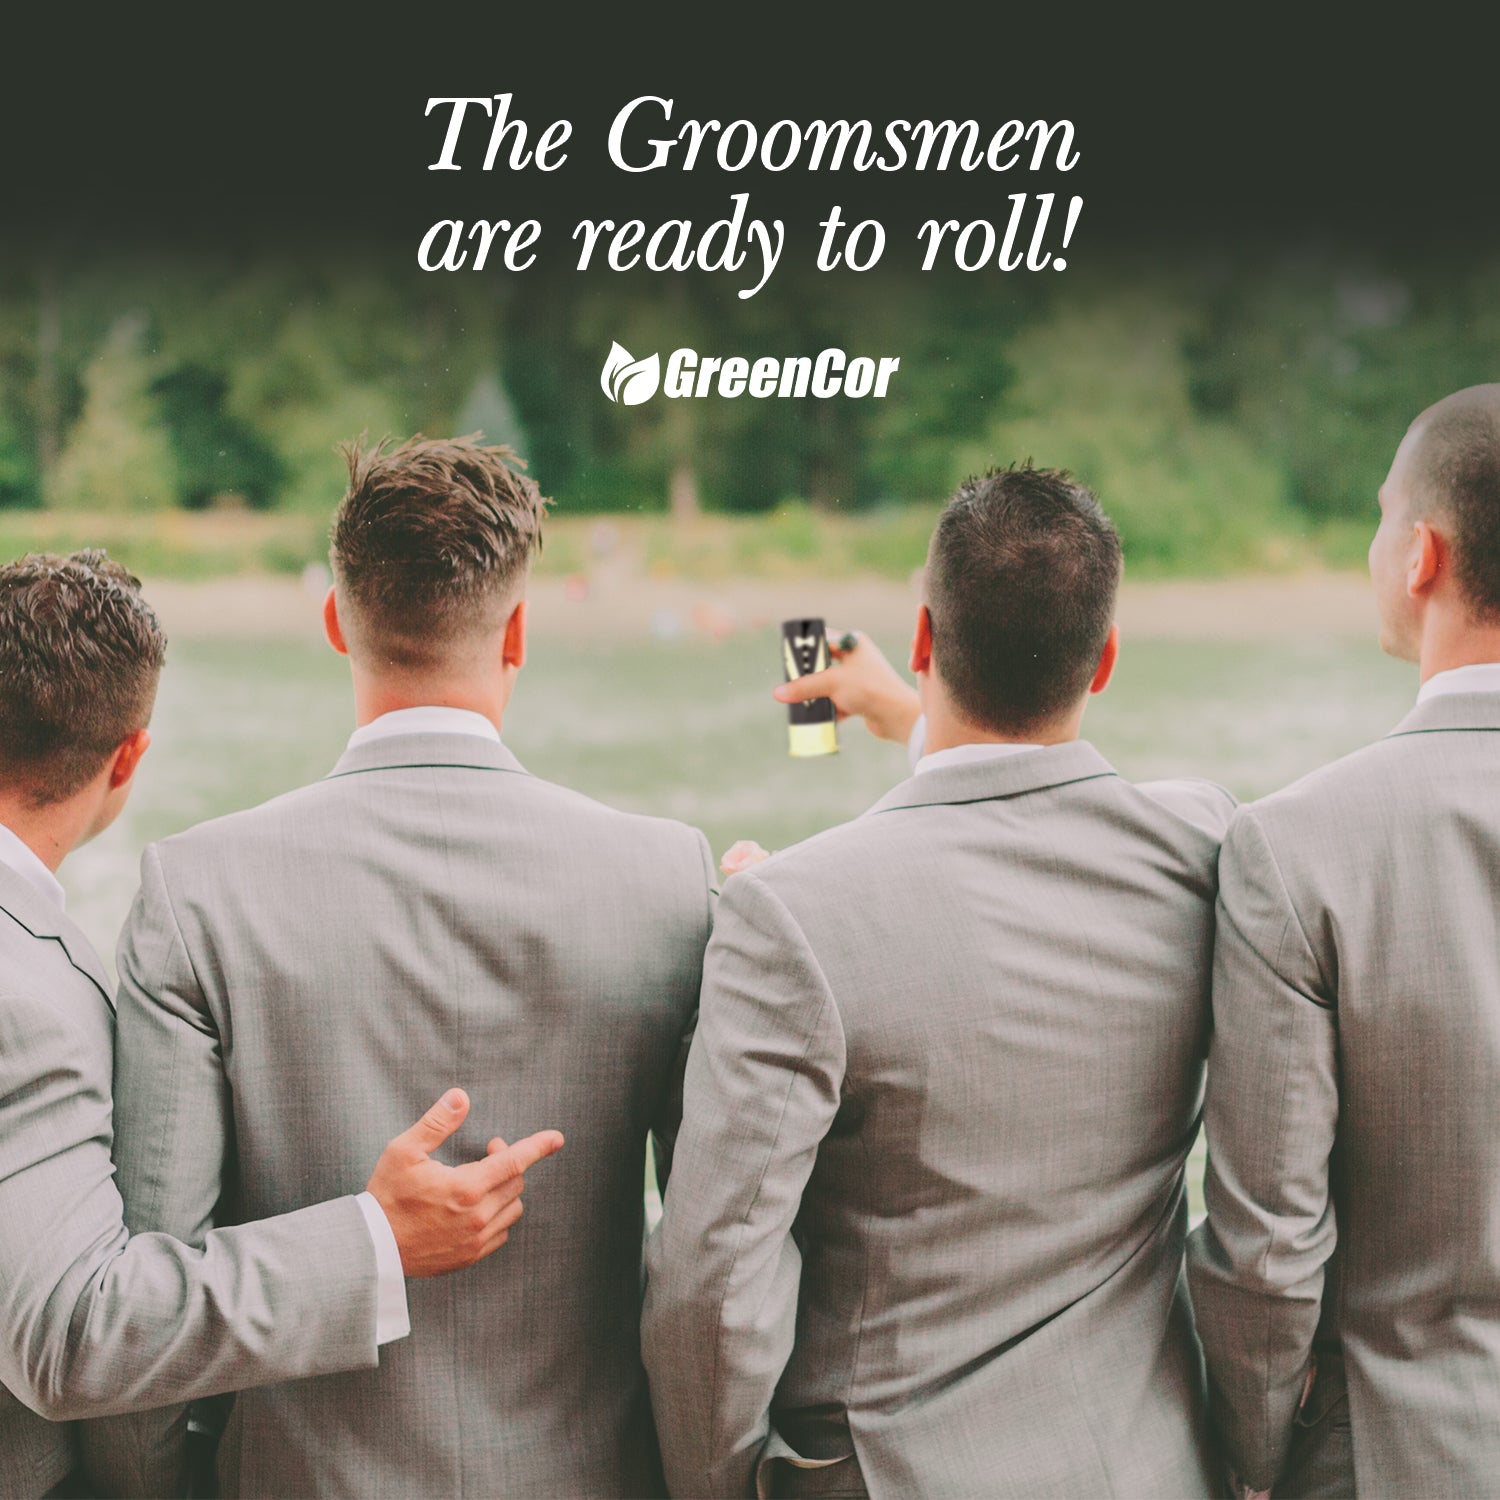 The Perfect Gift for the Groomsmen!